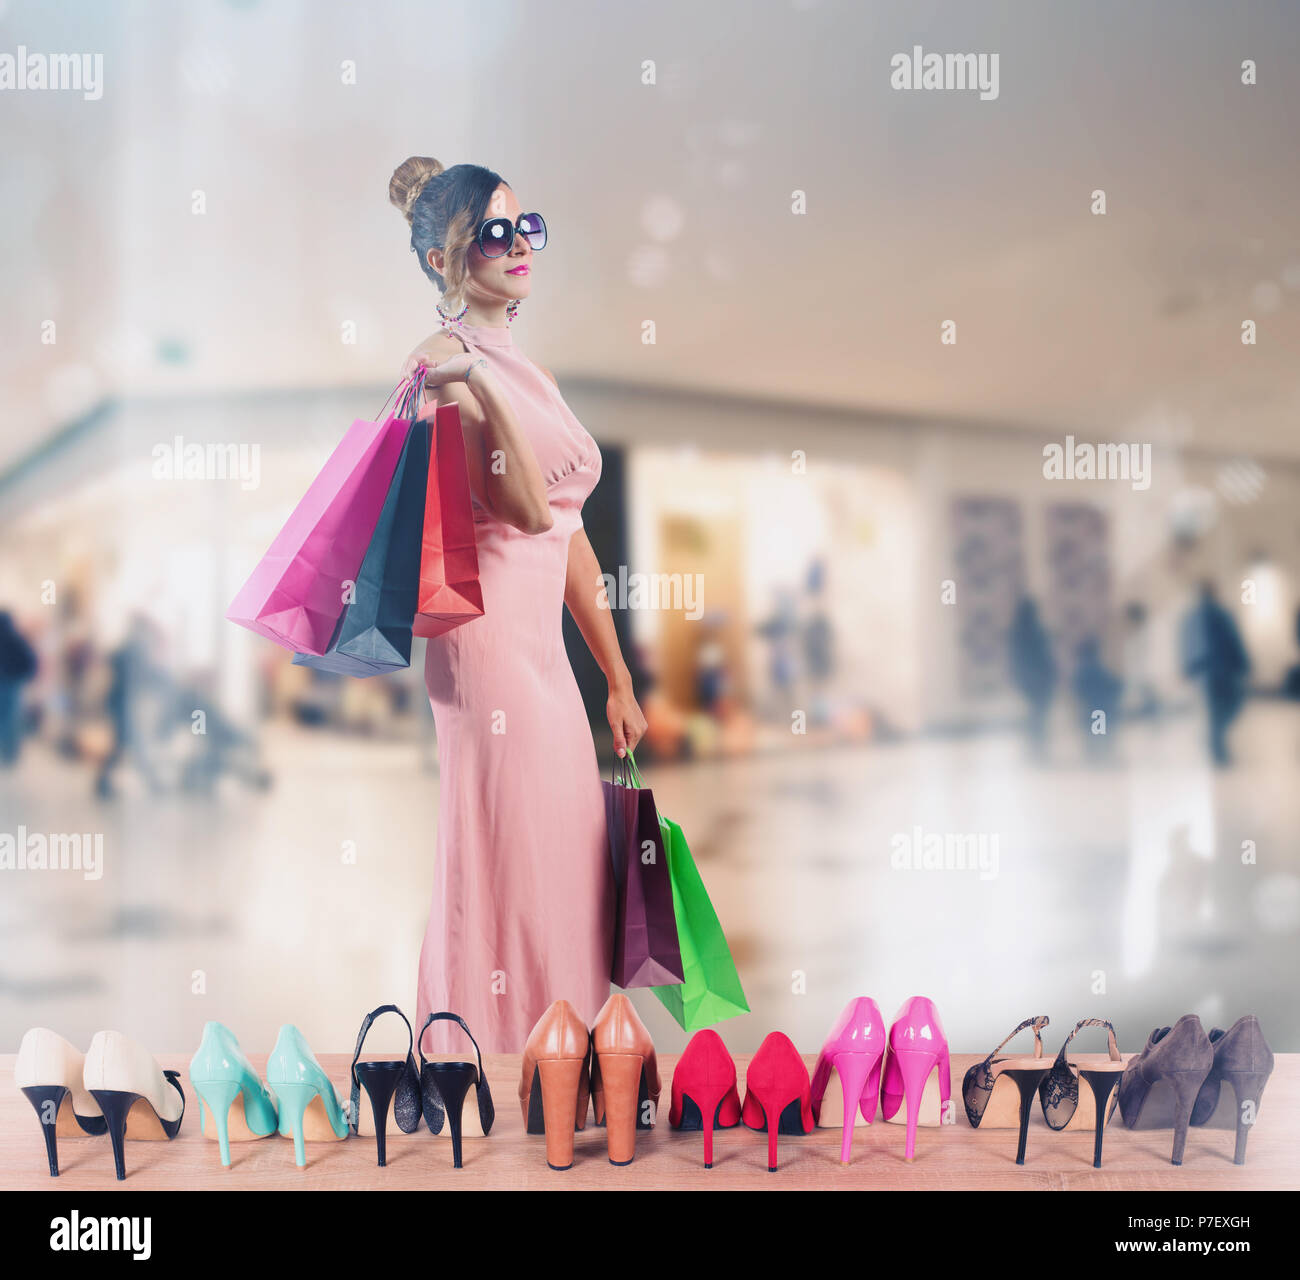 Girl full of bags does shopping in a store Stock Photo